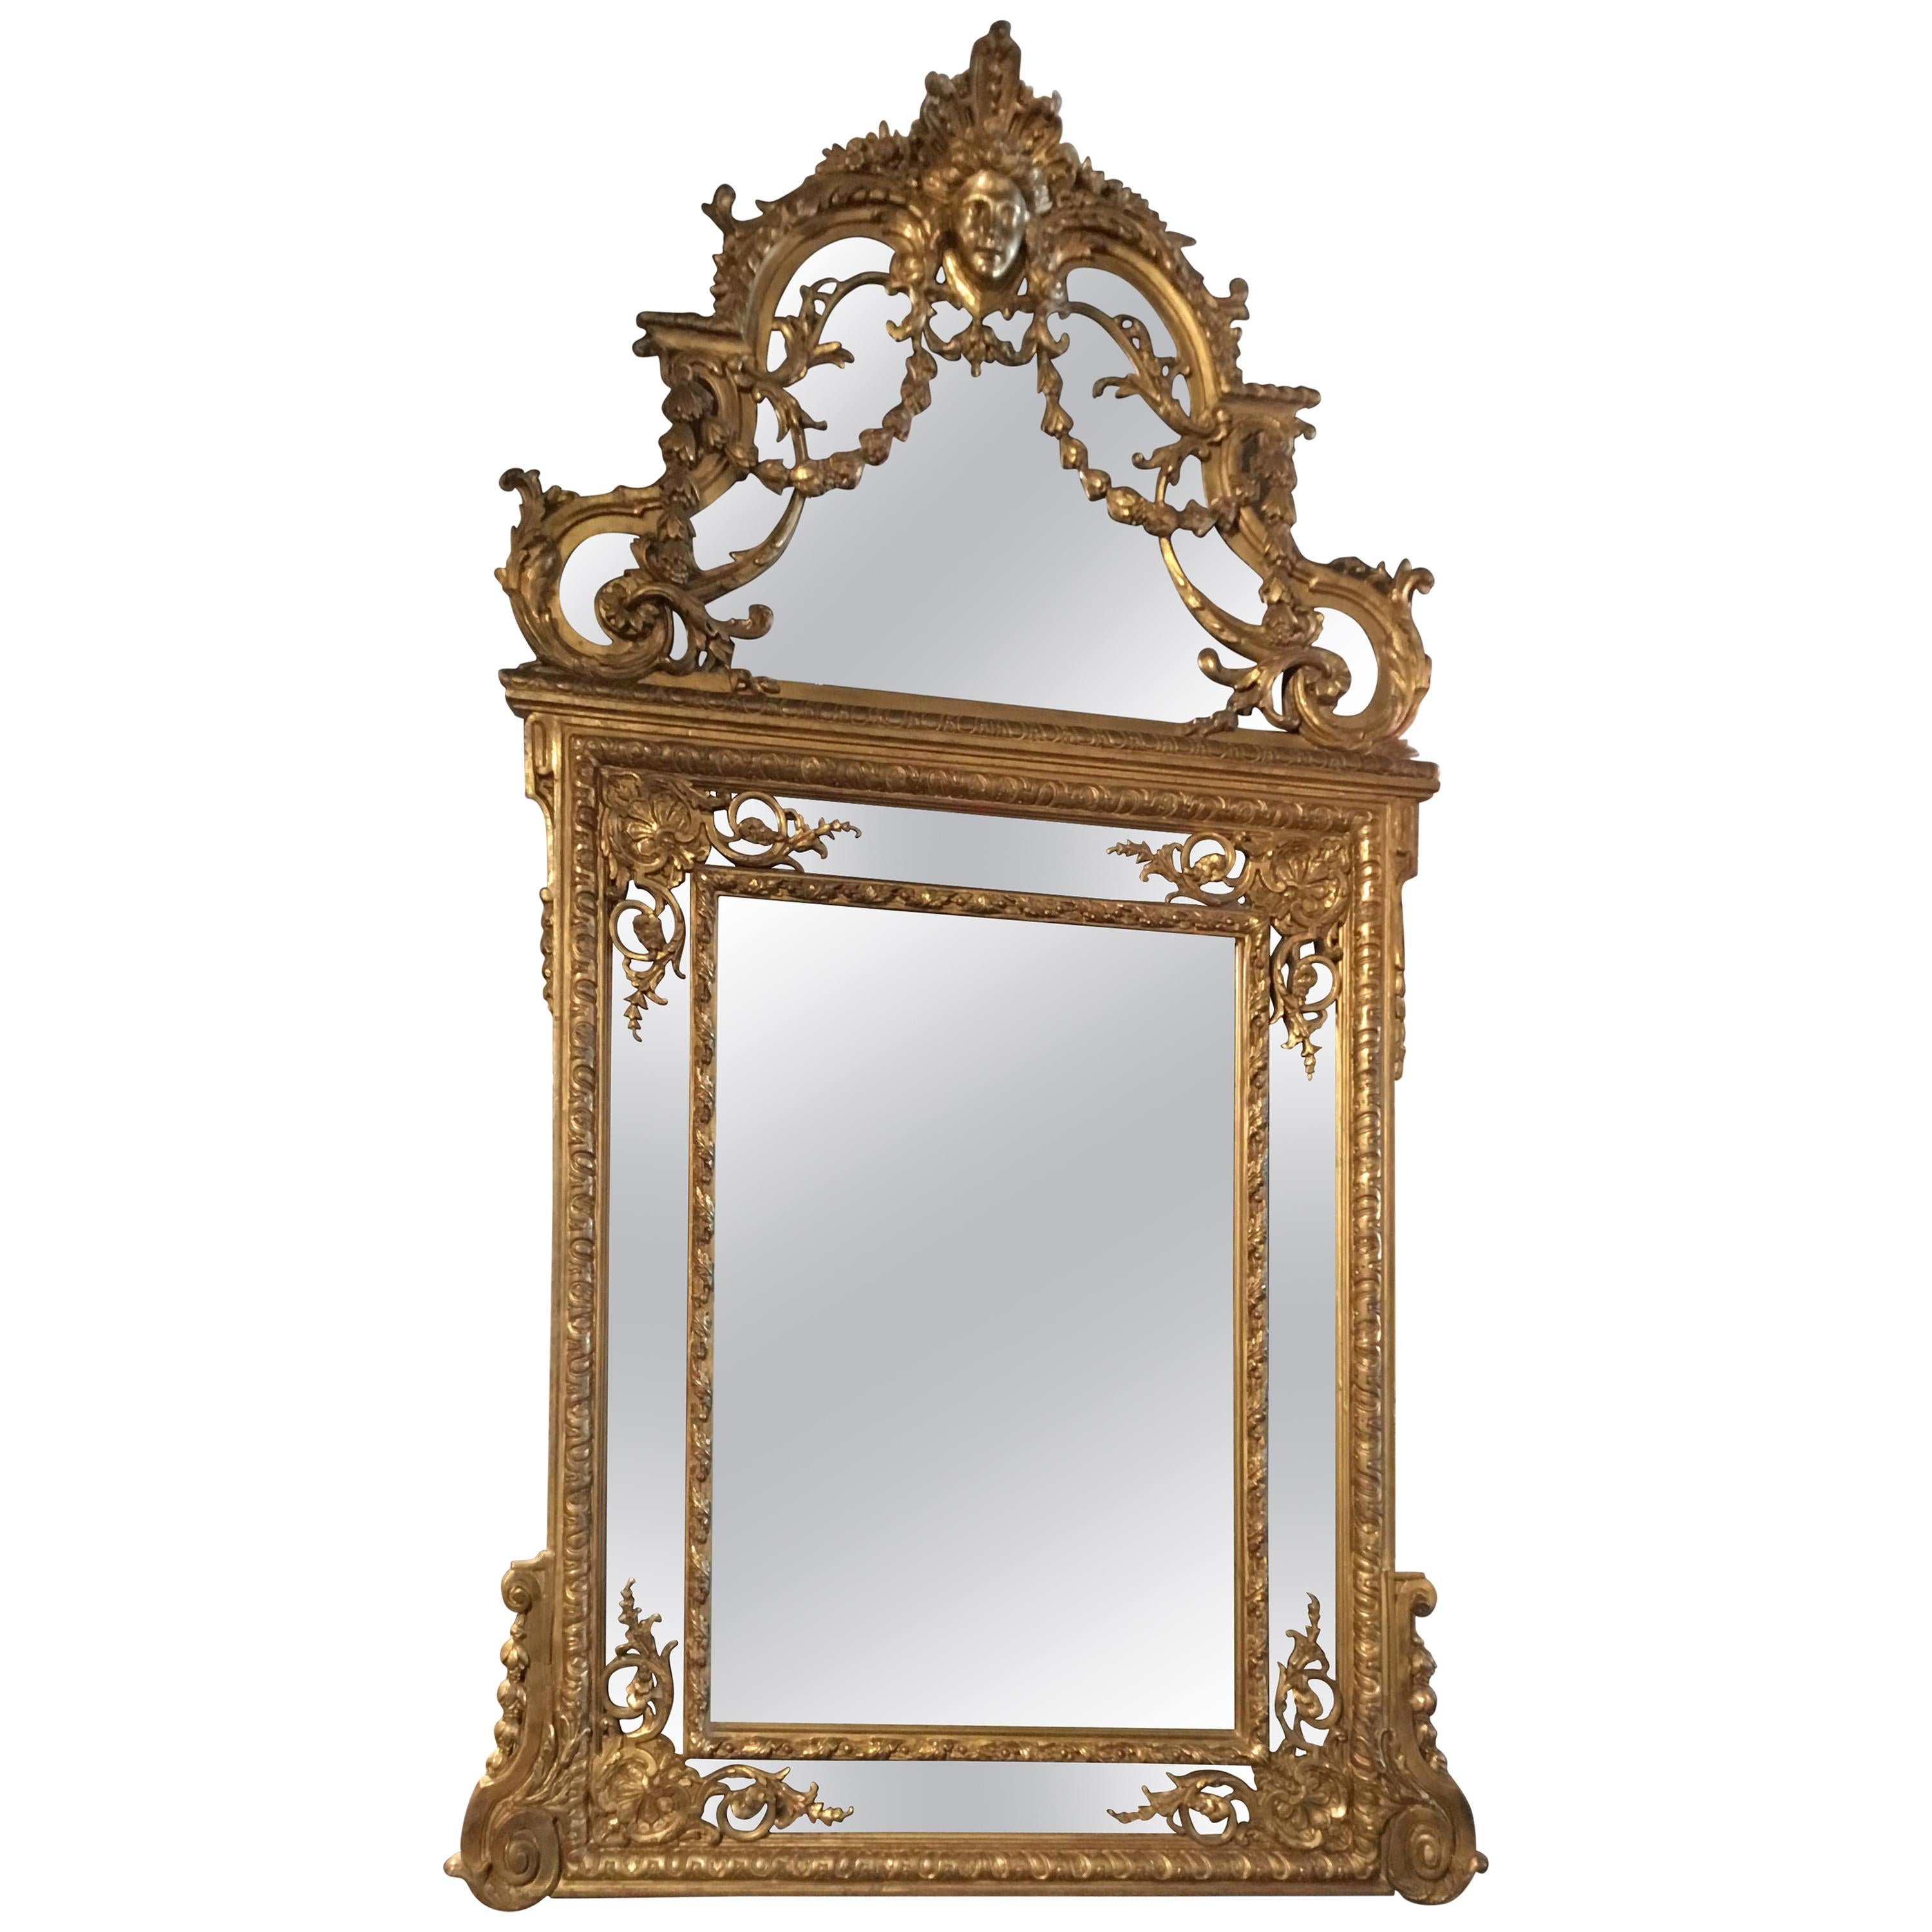 Elegant Louis XVI Style Giltwood Cushion Mirror, 19th C with Mask of Minerva For Sale